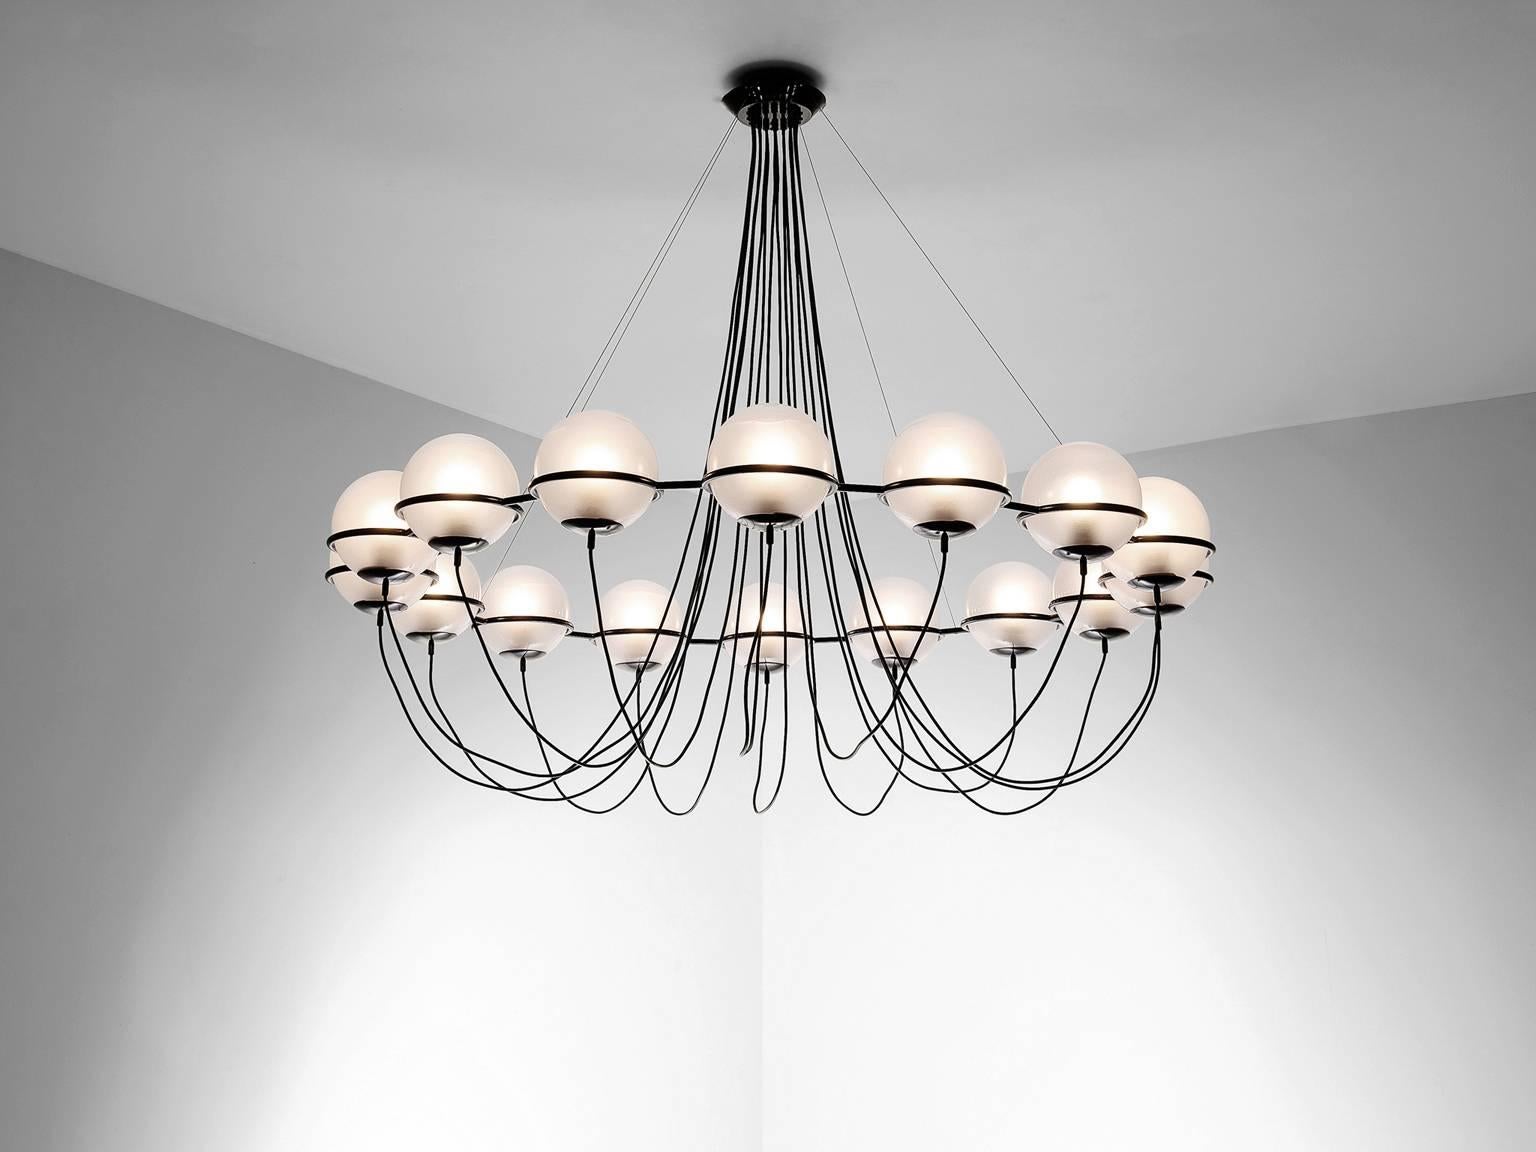 Large chandelier, metal and glass, Europe, 1970s.

Large 180 cm diameter chandeliers with 16 glass spheres. This design is inspired on the earlier designs of Gino Sarfatti for Arteluce, but this is as well very nice designed and has great look and